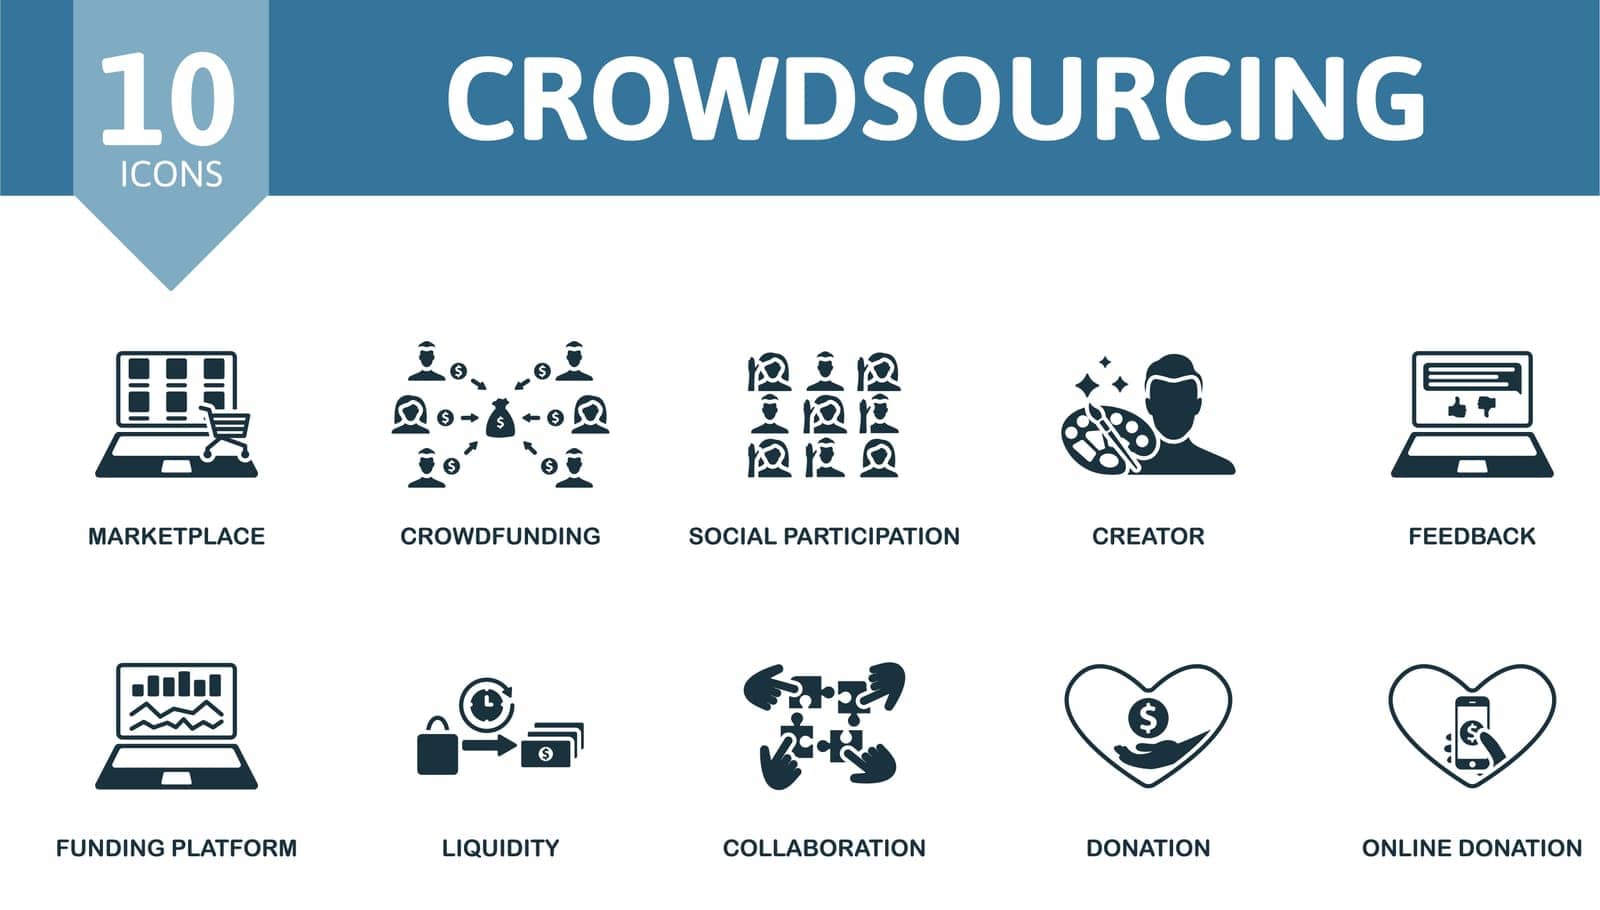 Crowdsourcing icons set. Creative elements: marketplace, crowdfunding, social participation, creator, feedback, funding platform, liquidity, collaboration, donation, online donation.